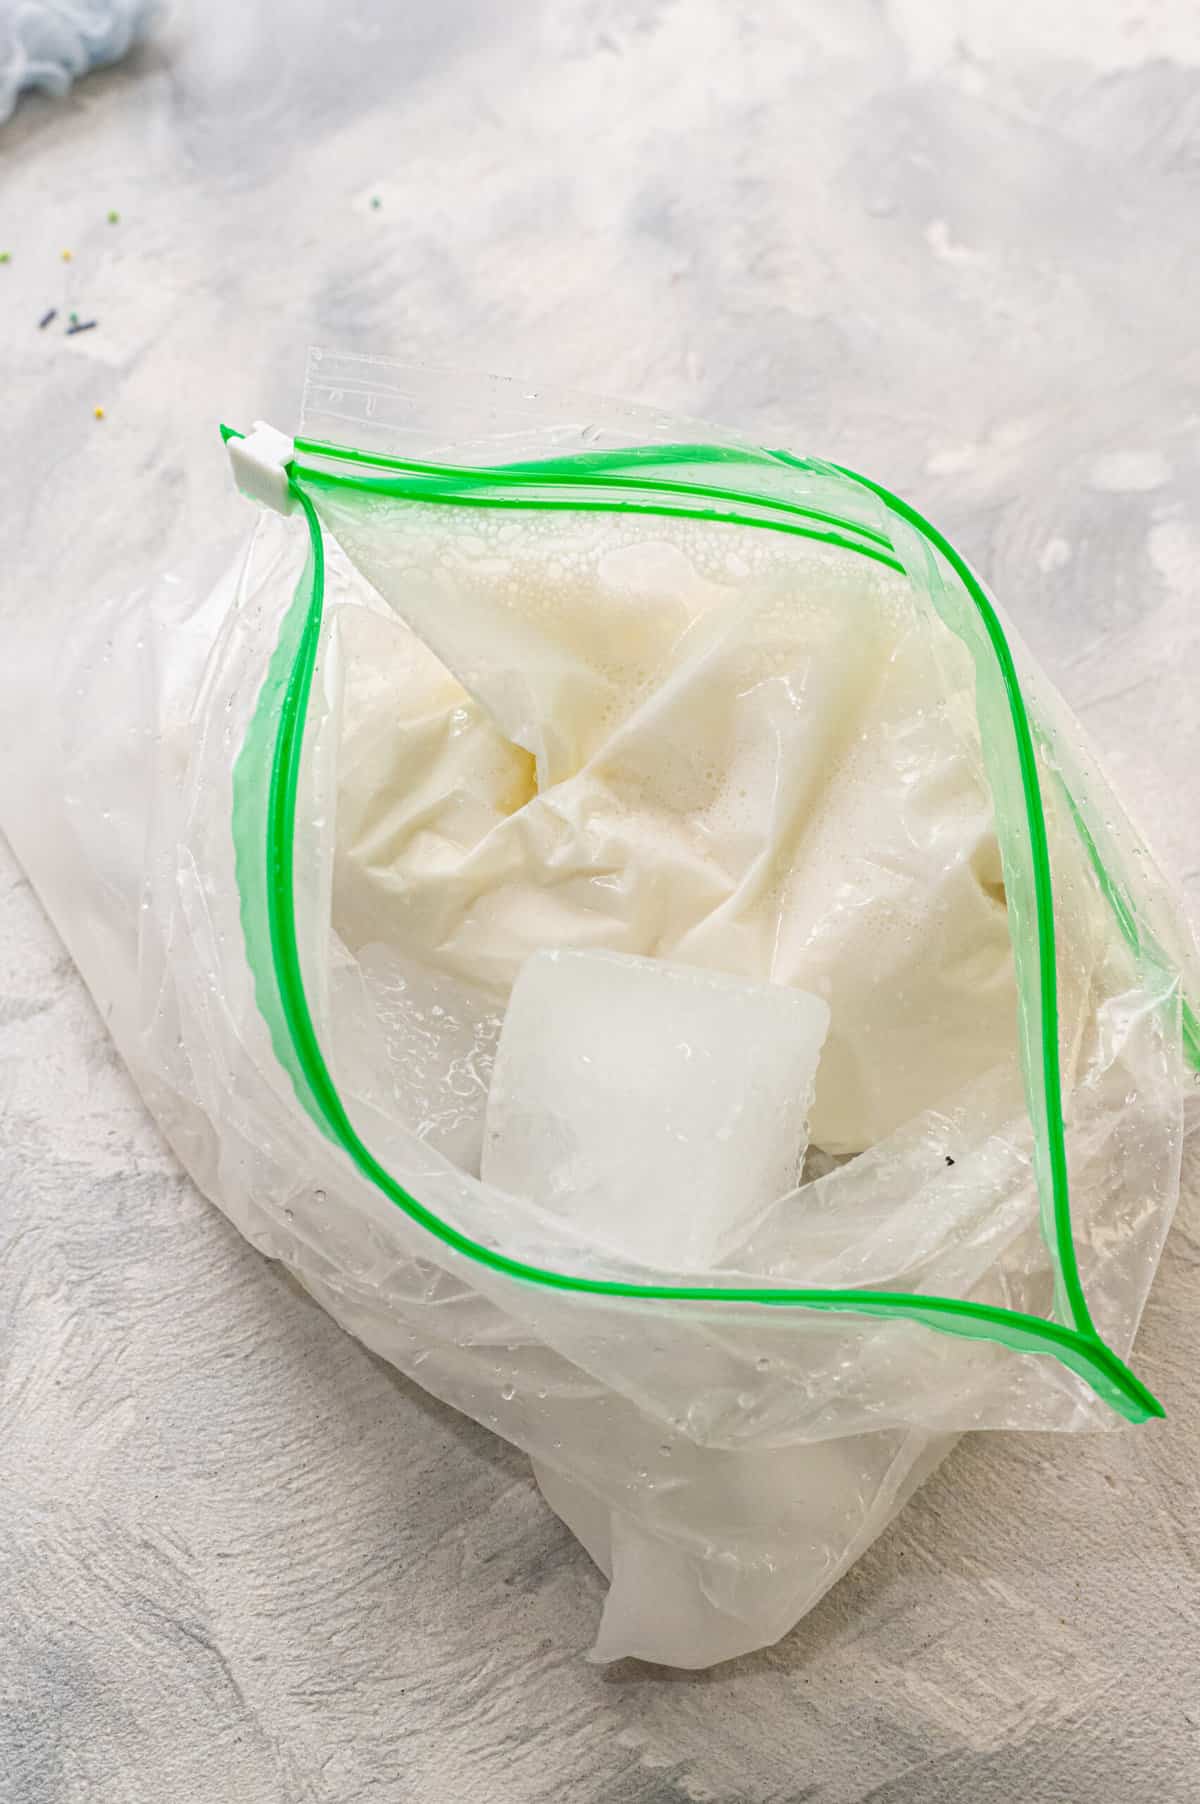 Place ice cream mixture bag into the bigger bag with the ice cream and salt and shake around